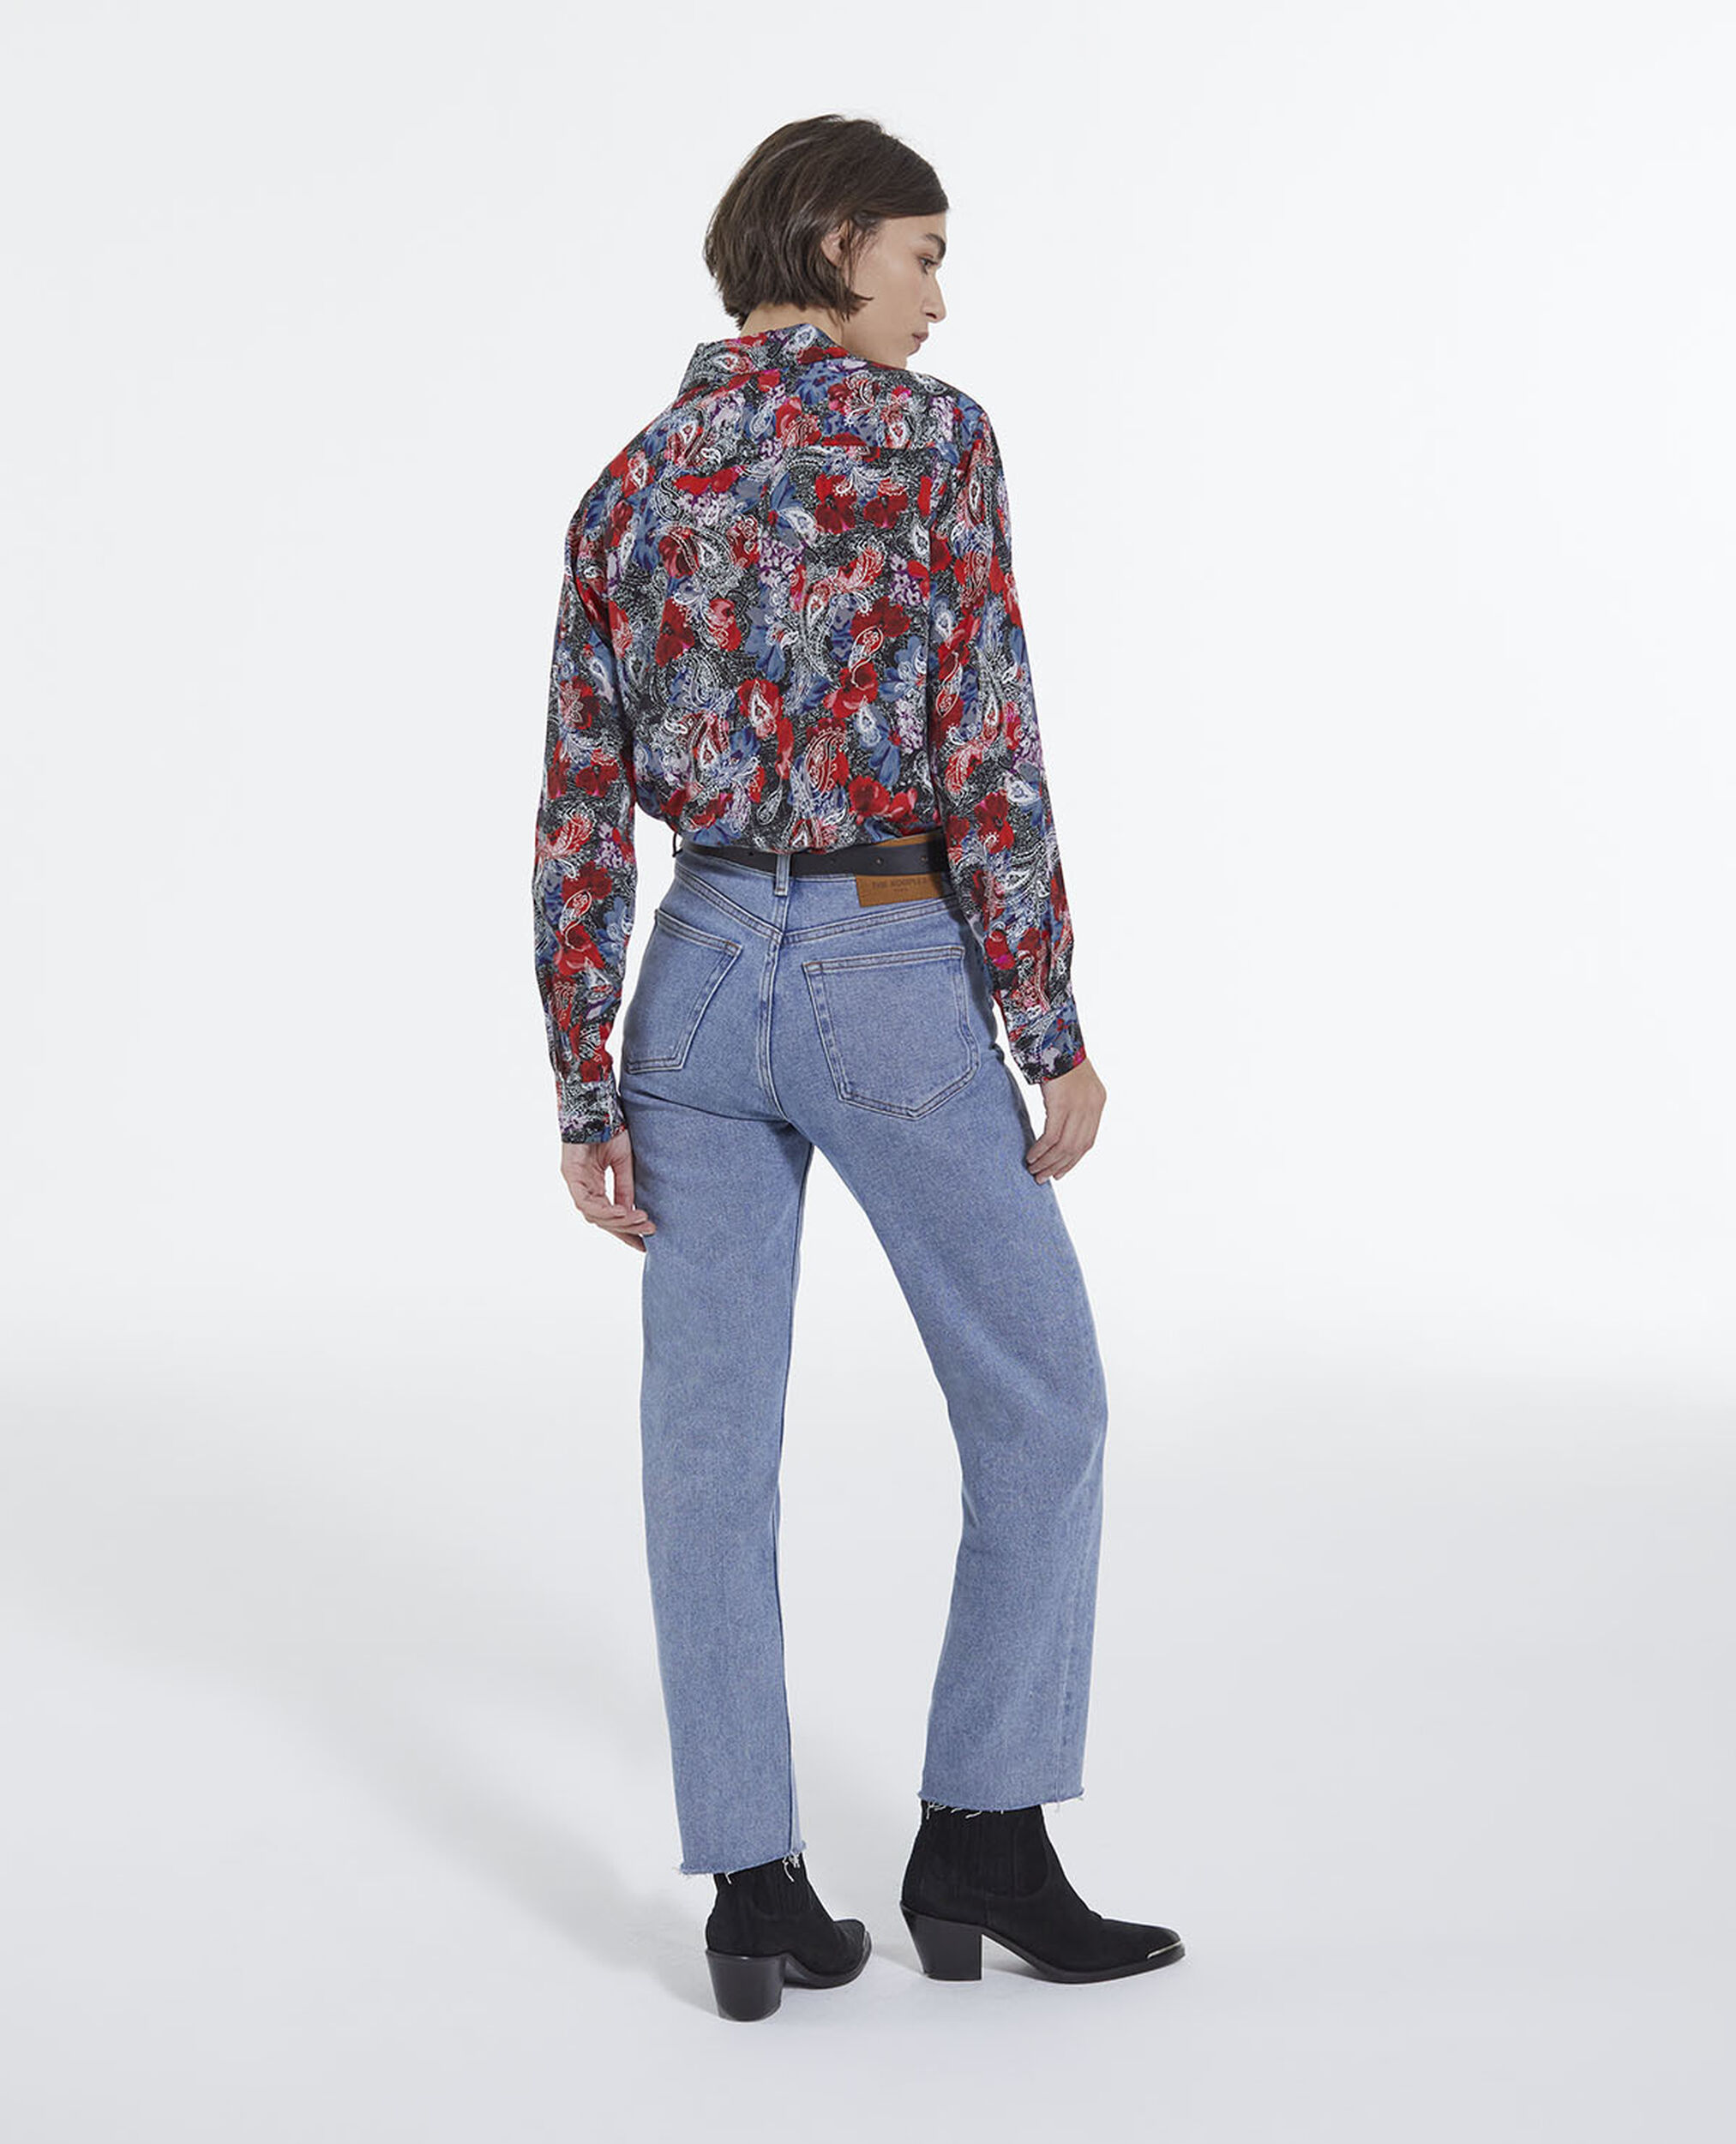 Multicolored printed shirt, RED, hi-res image number null